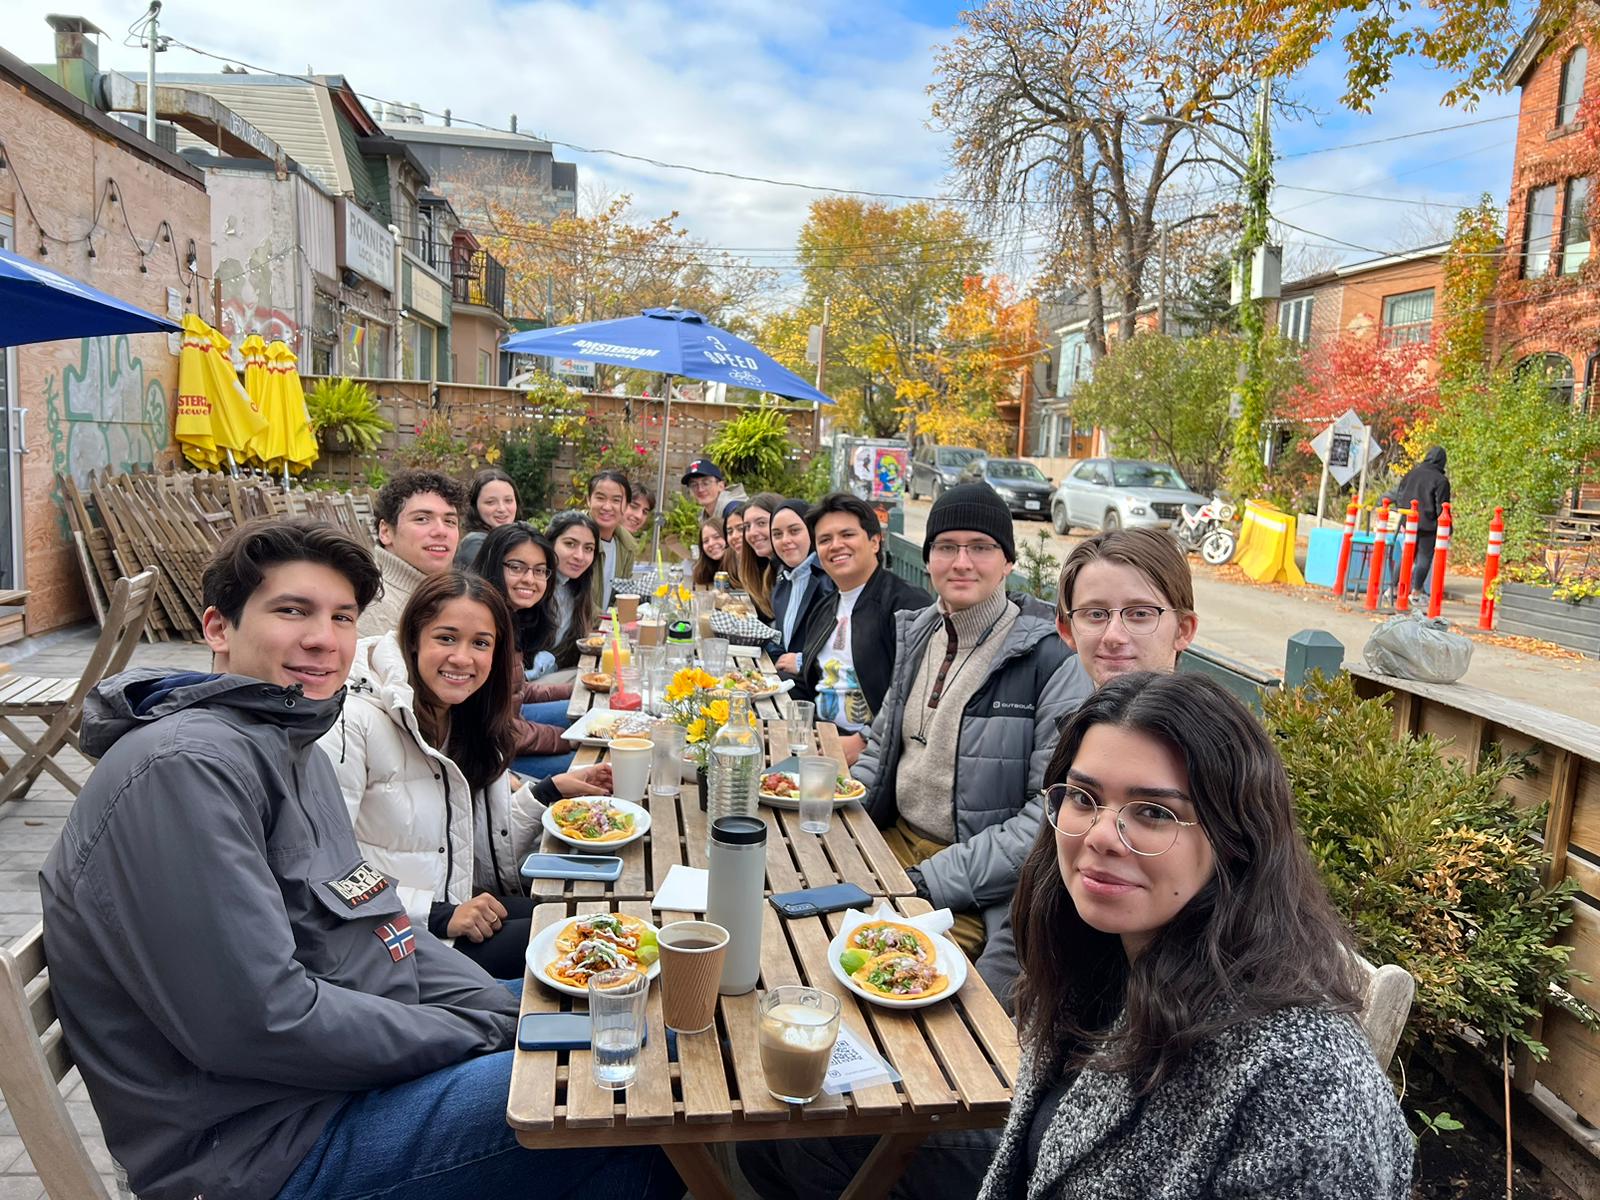 The Munk One 2022-23 Cohort having lunch after conducting fieldwork for the Ethnography of Kensington Market.